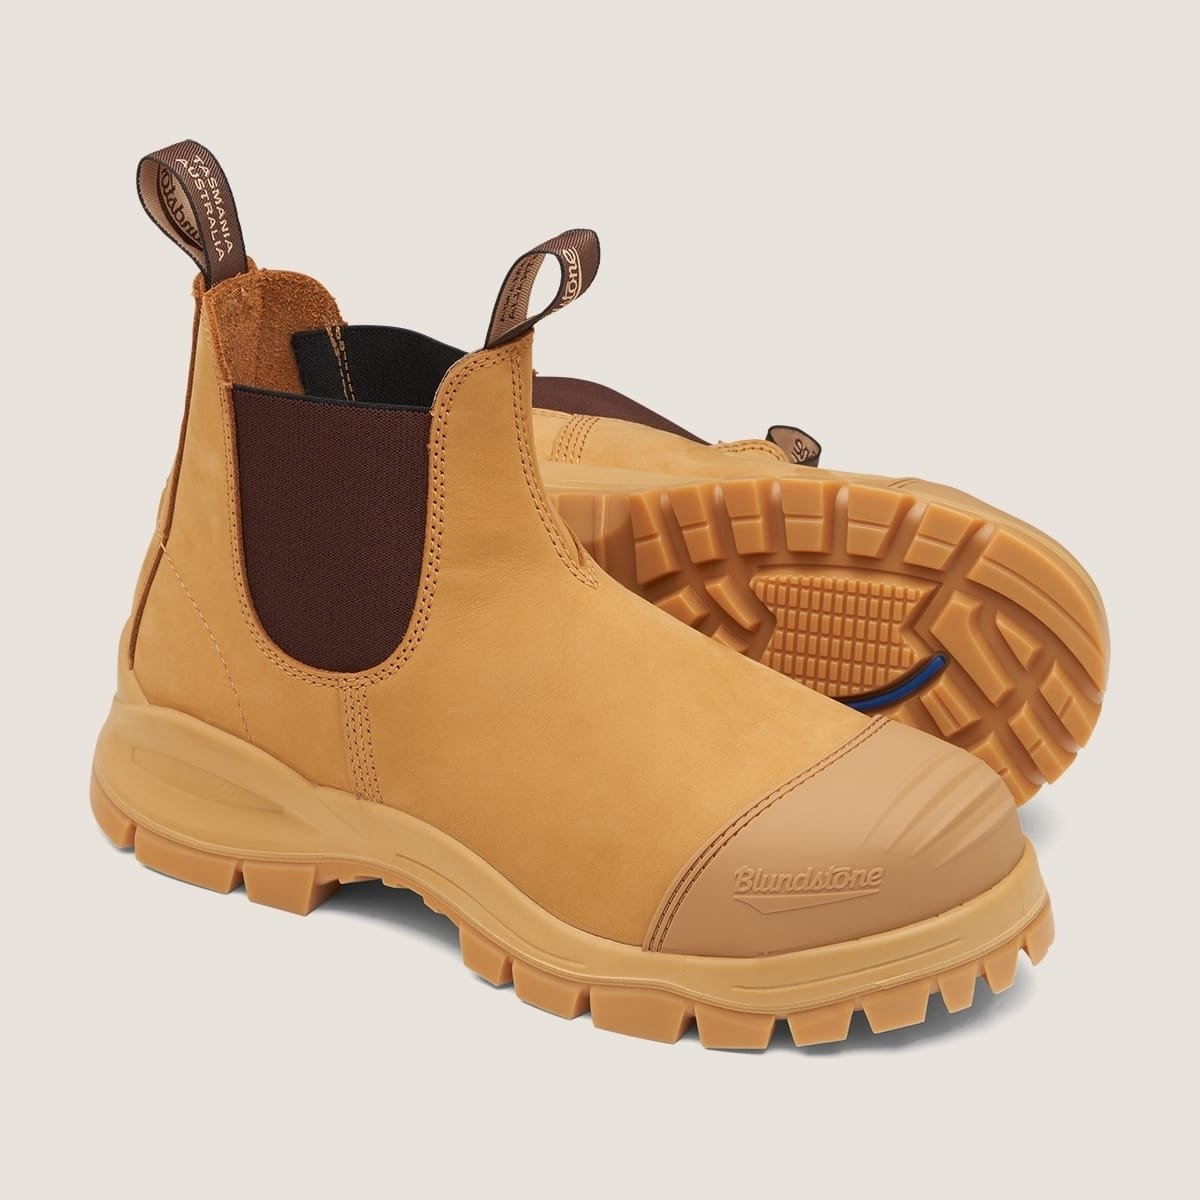 BLUNDSTONE SAFETY Men's Extreme Series Steel Toe Chelsea Work Boot Wheat - 989 WHEAT - WHEAT, 8.5